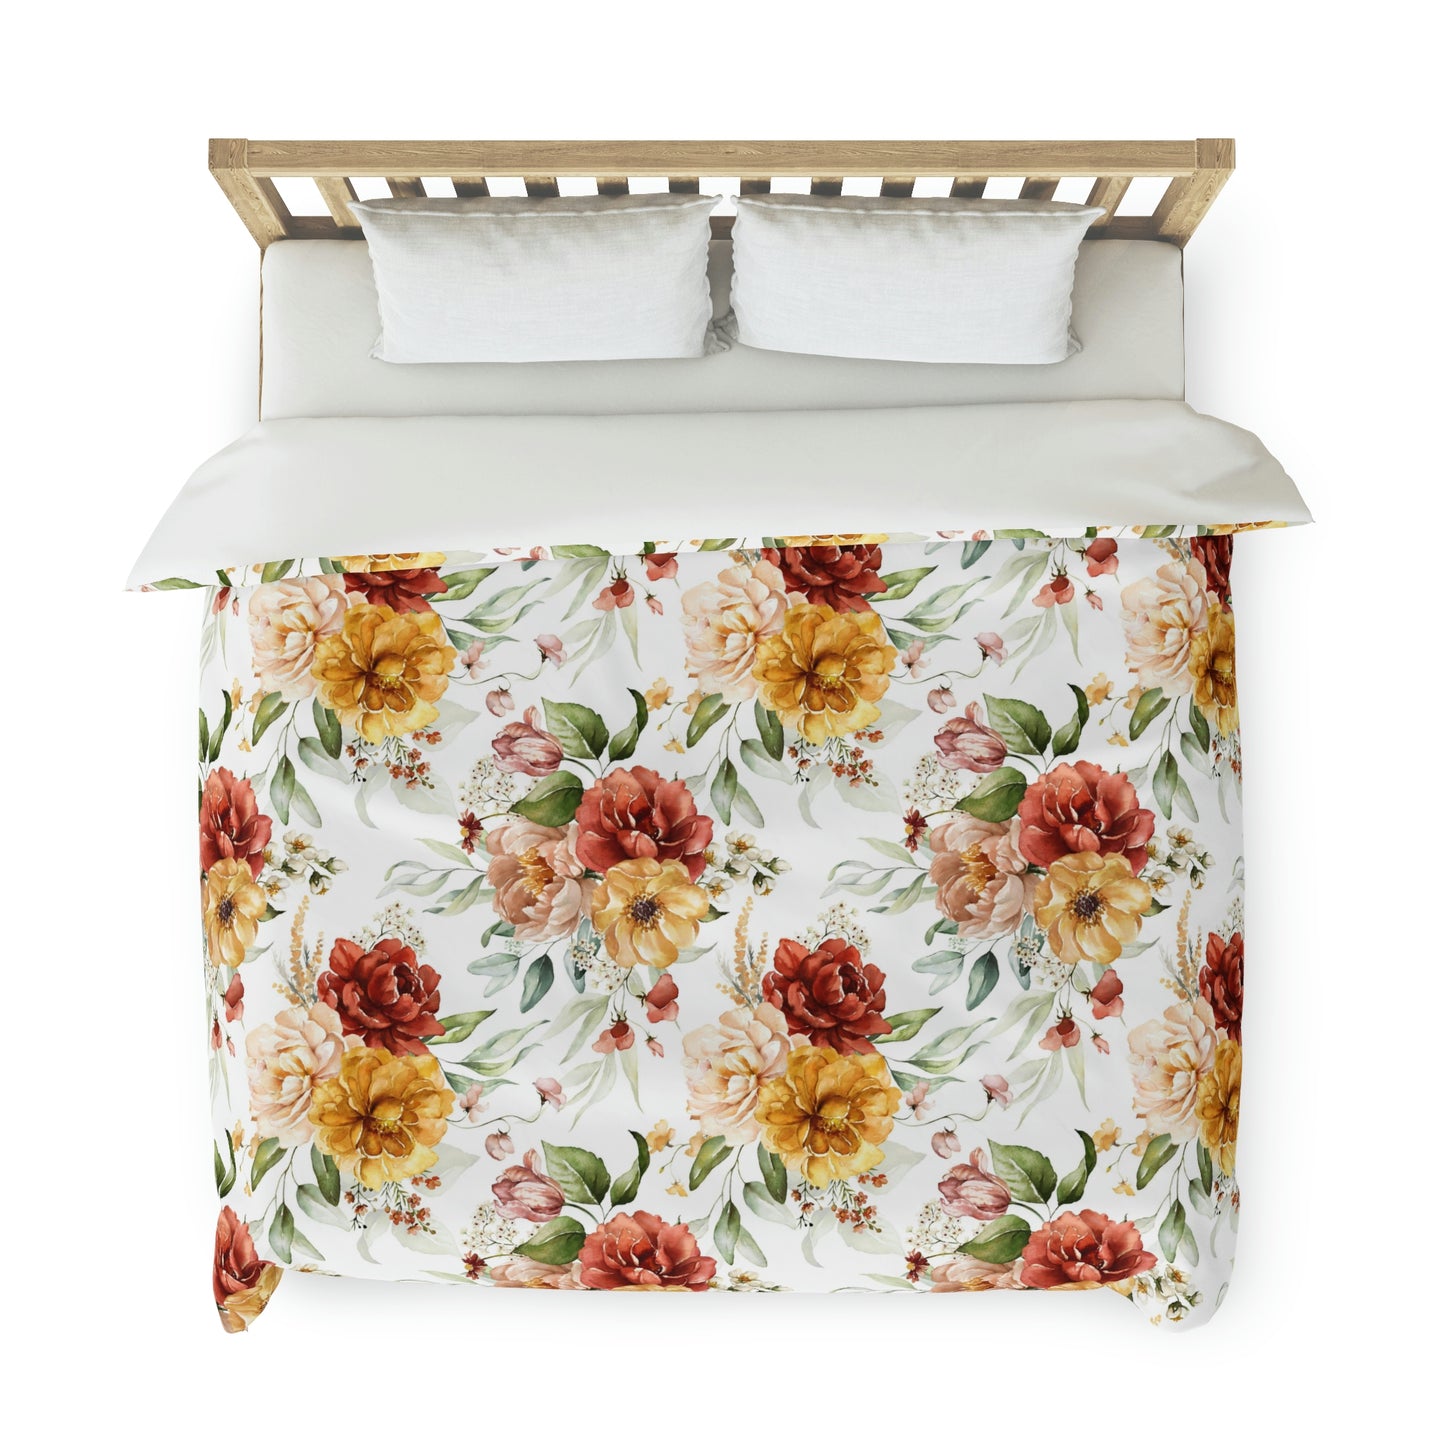 Yellow Orange Floral Pattern Duvet lying on a bed, microfiber floral duvet cover bedroom accent